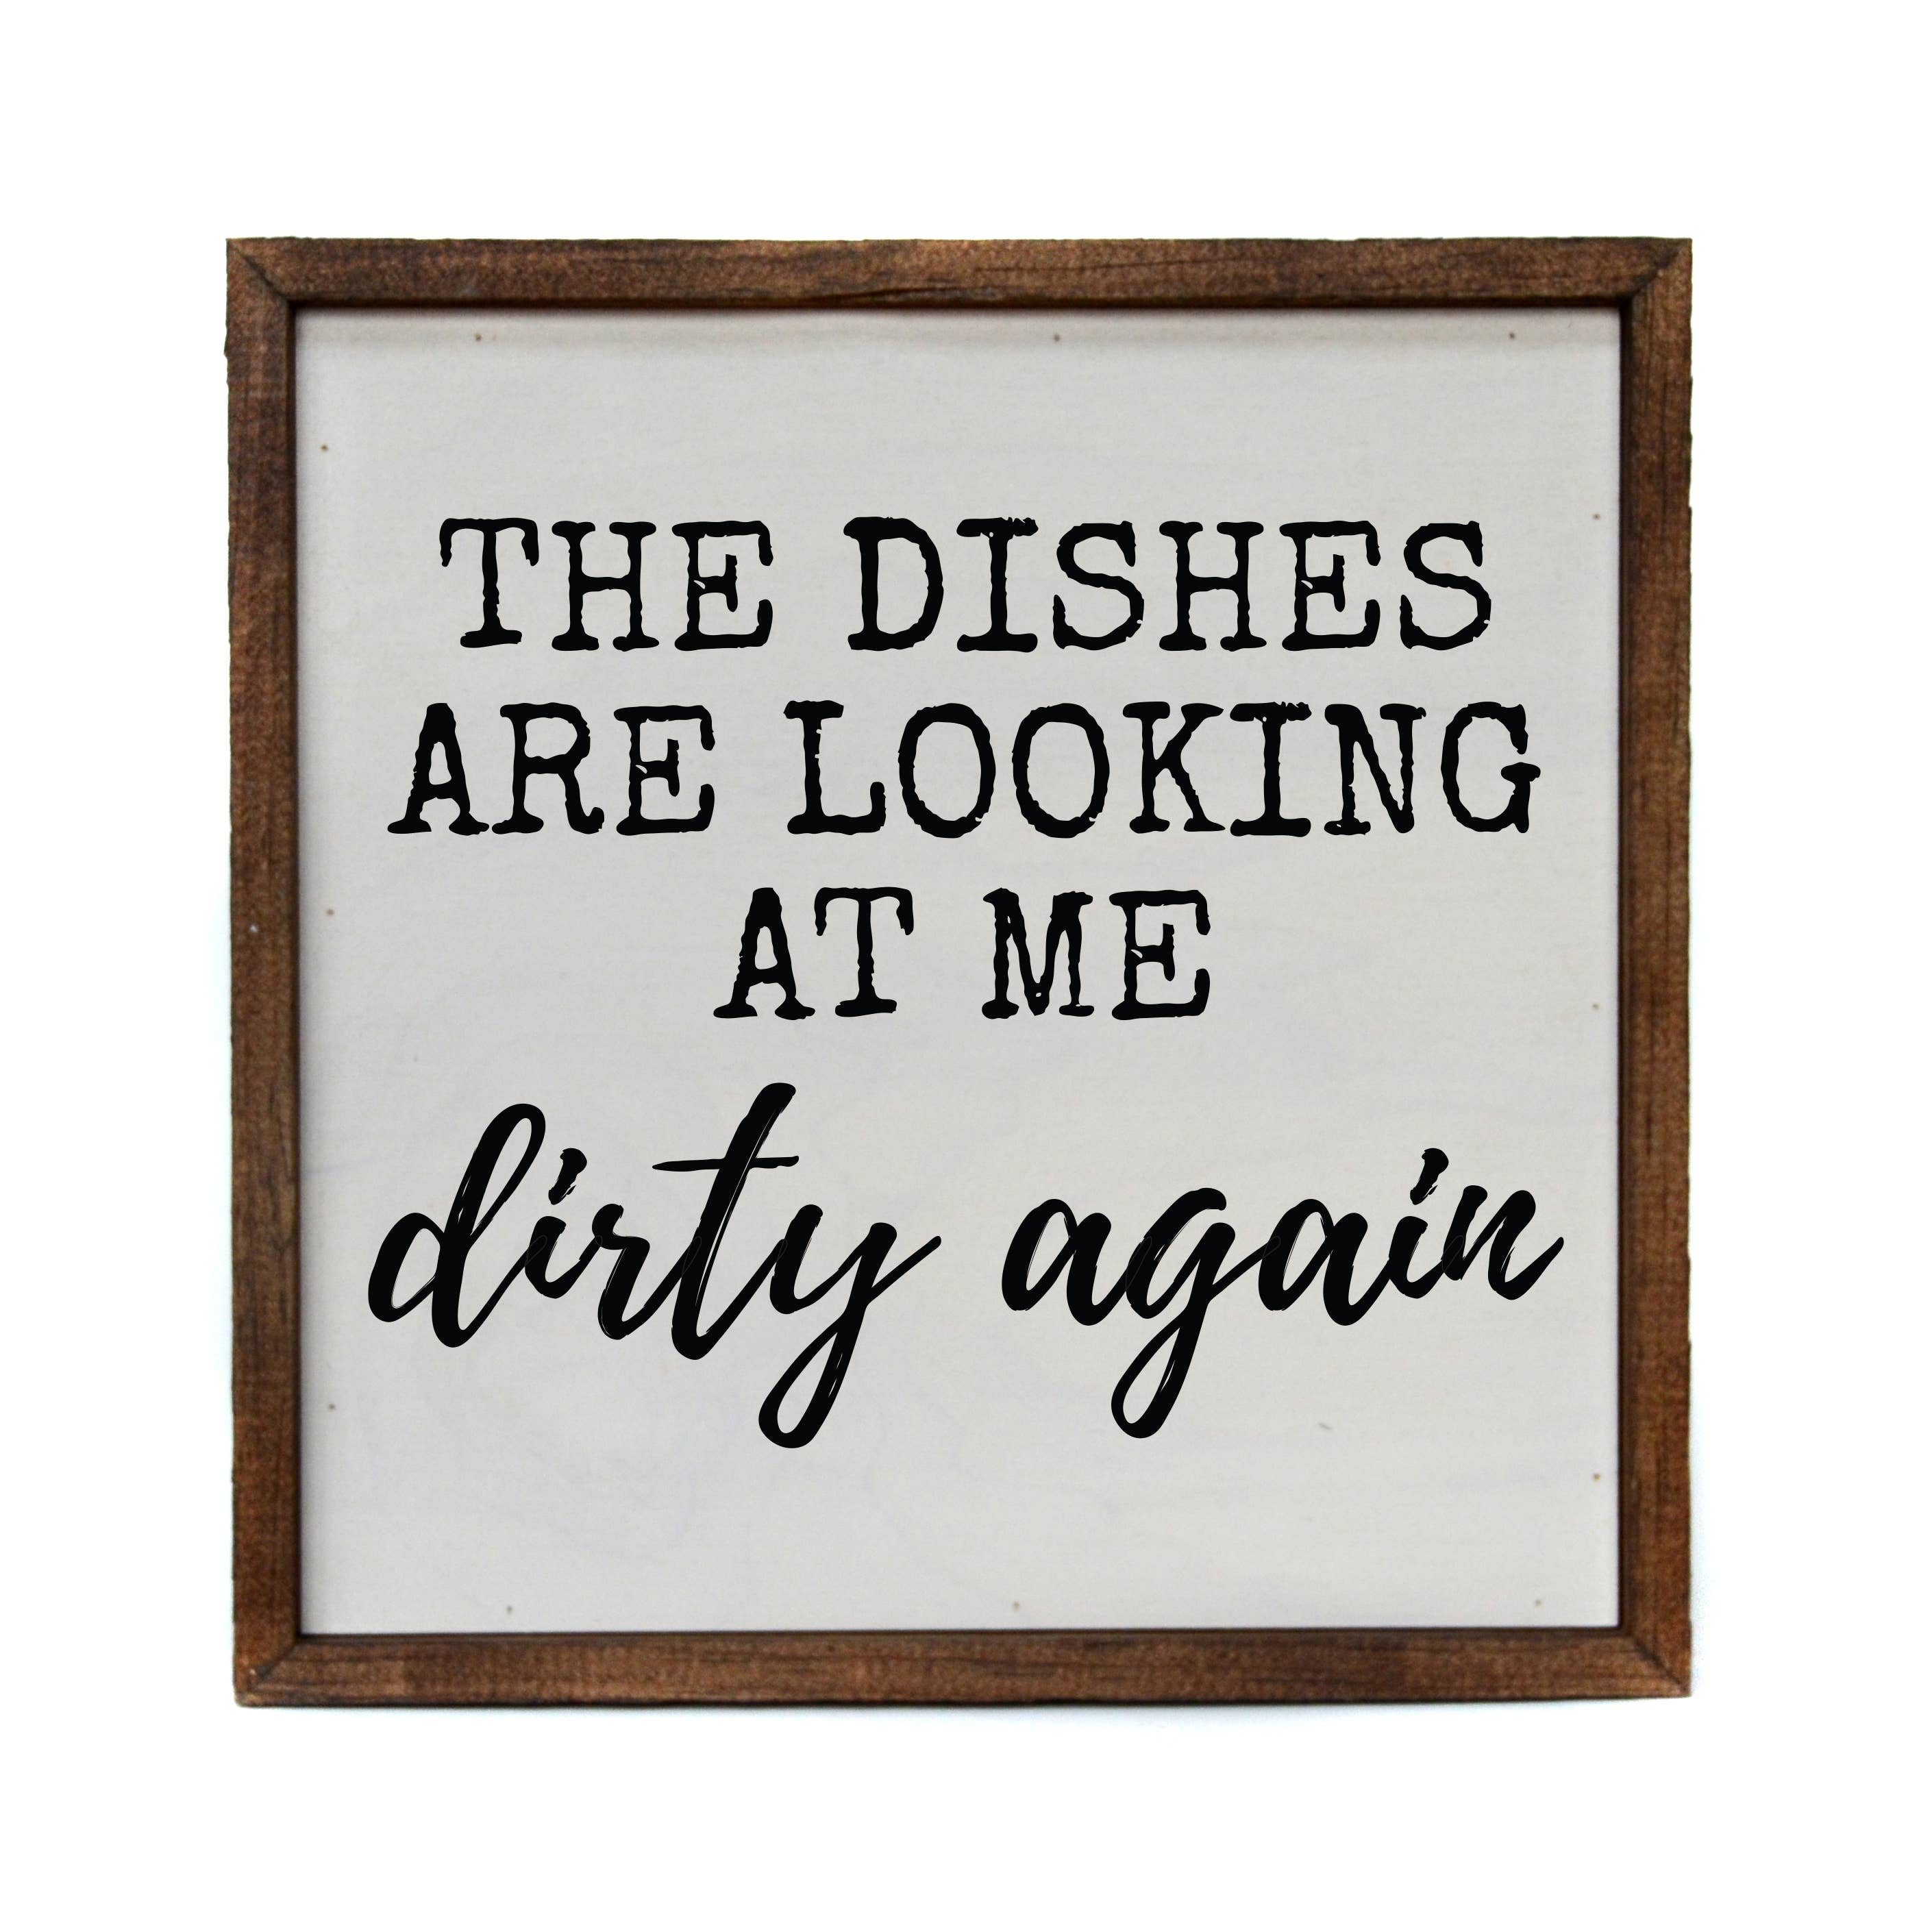 The Dishes Are Looking At Me Dirty Again - Sign